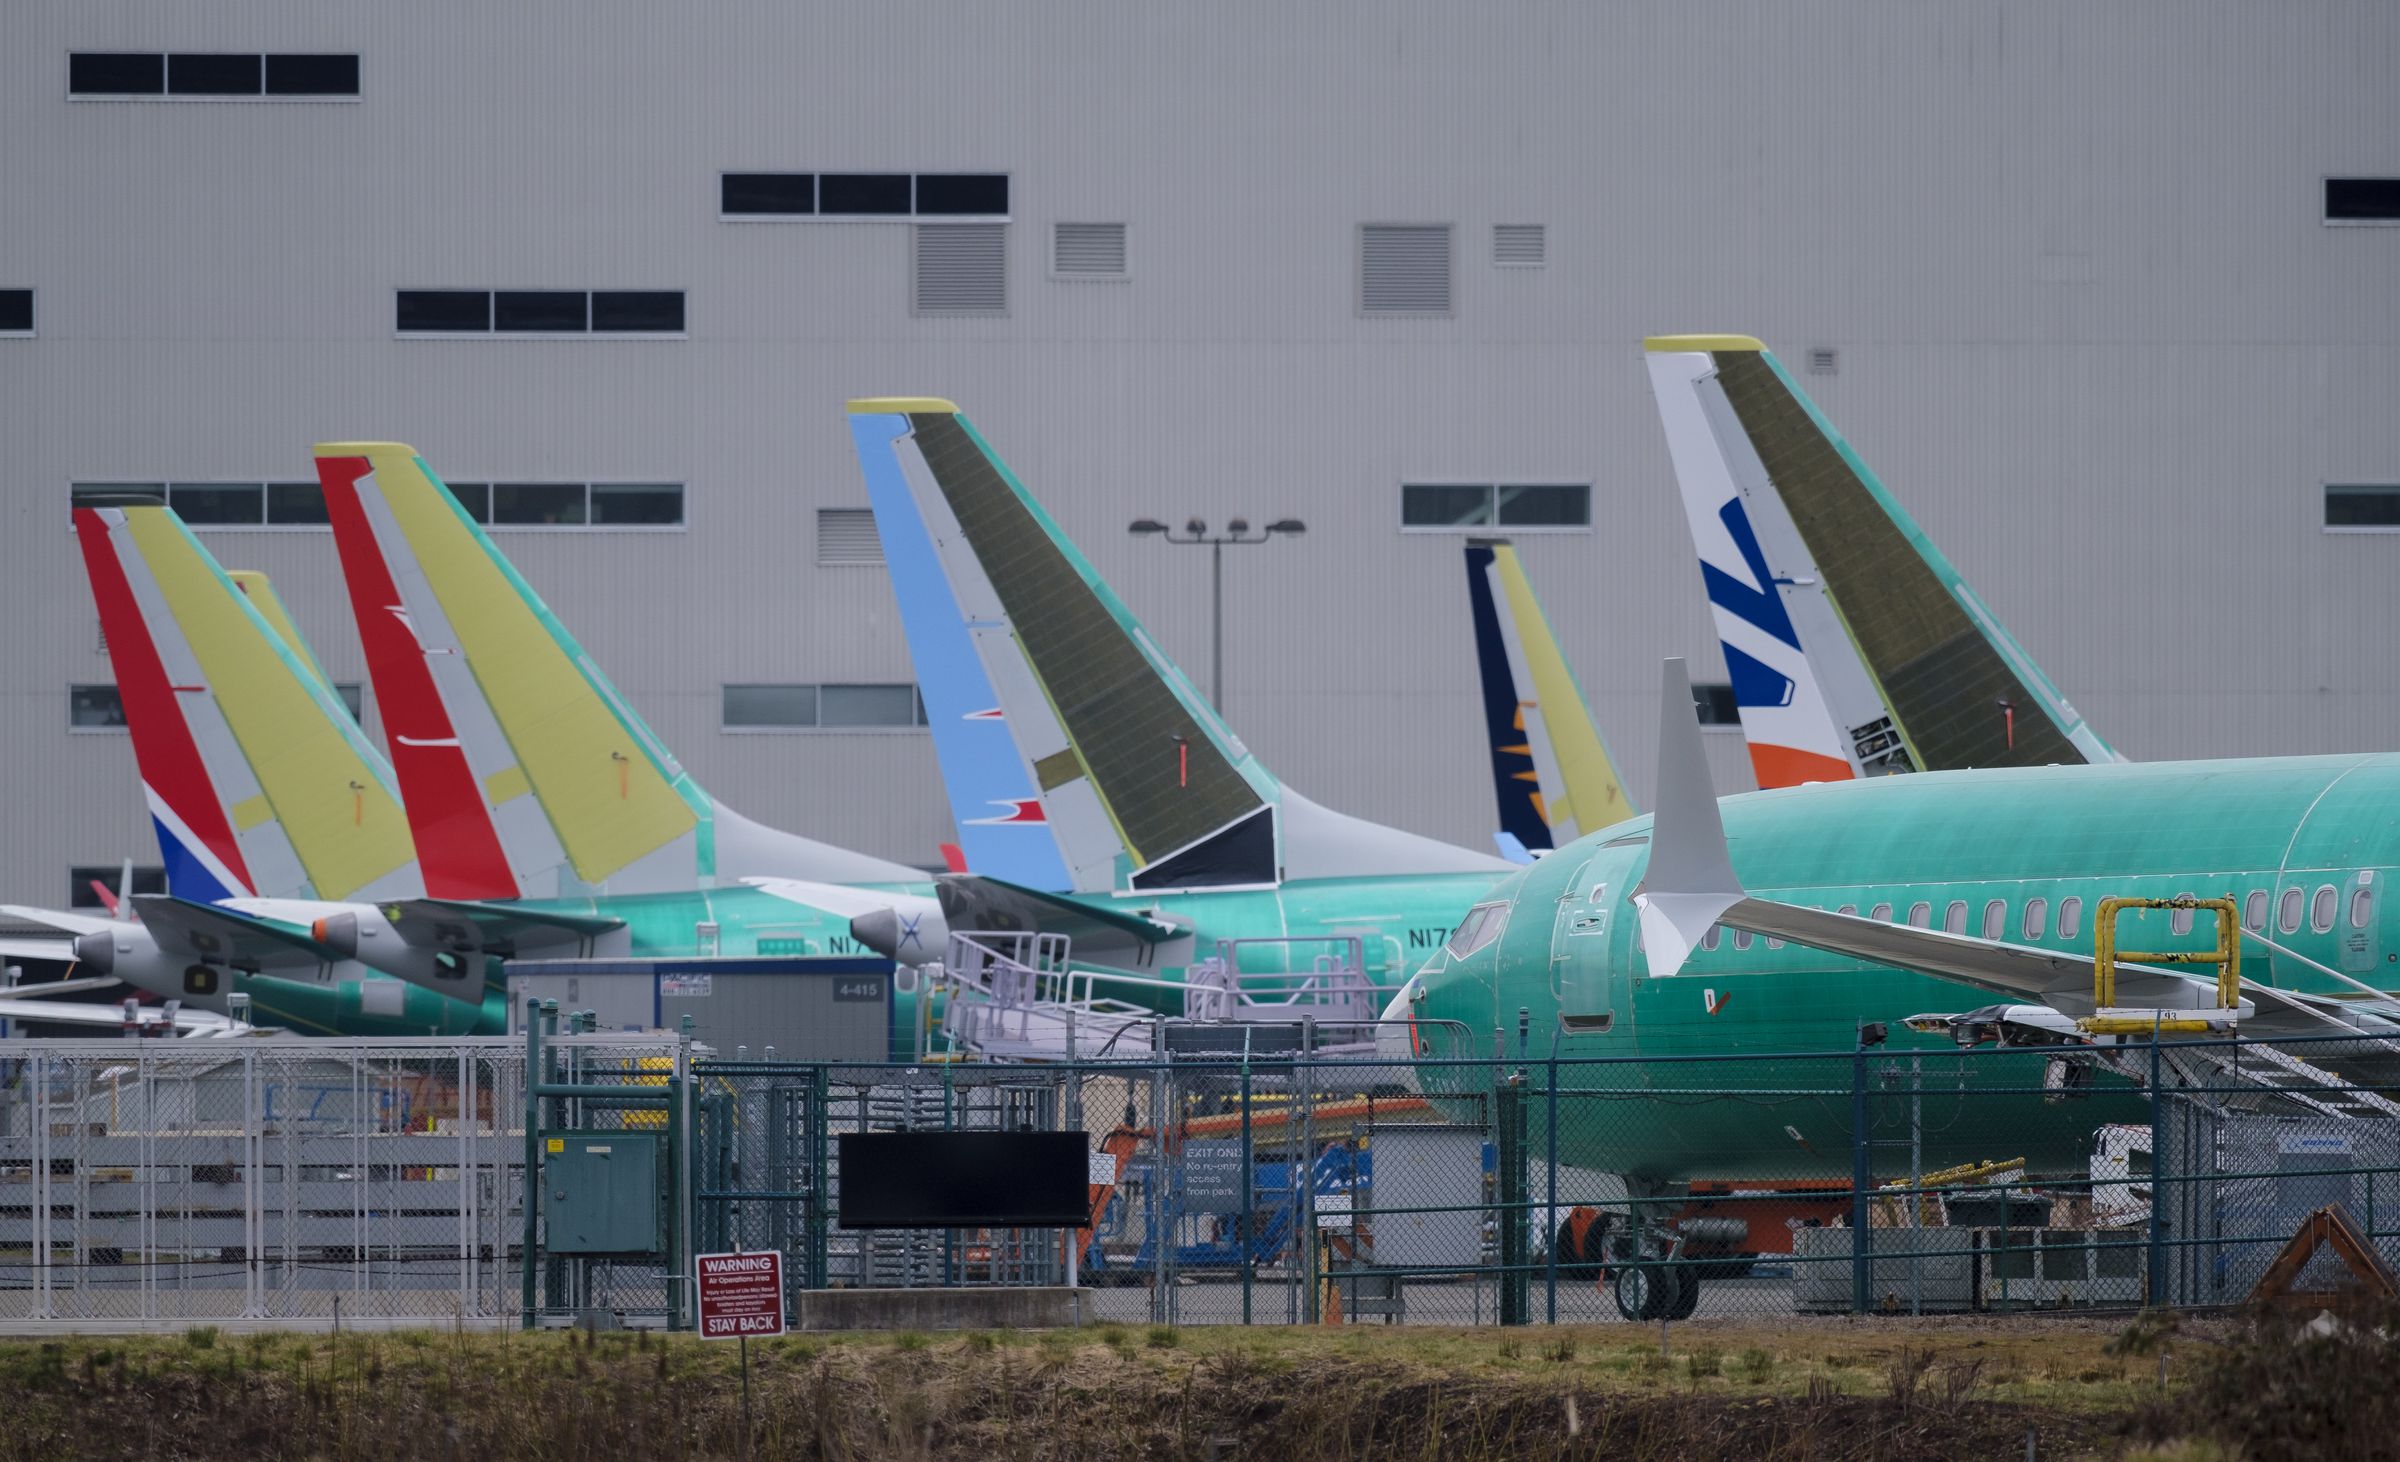 U.S. Grounds All Boeing 737 MAX Aircraft After Viewing New Satellite Data